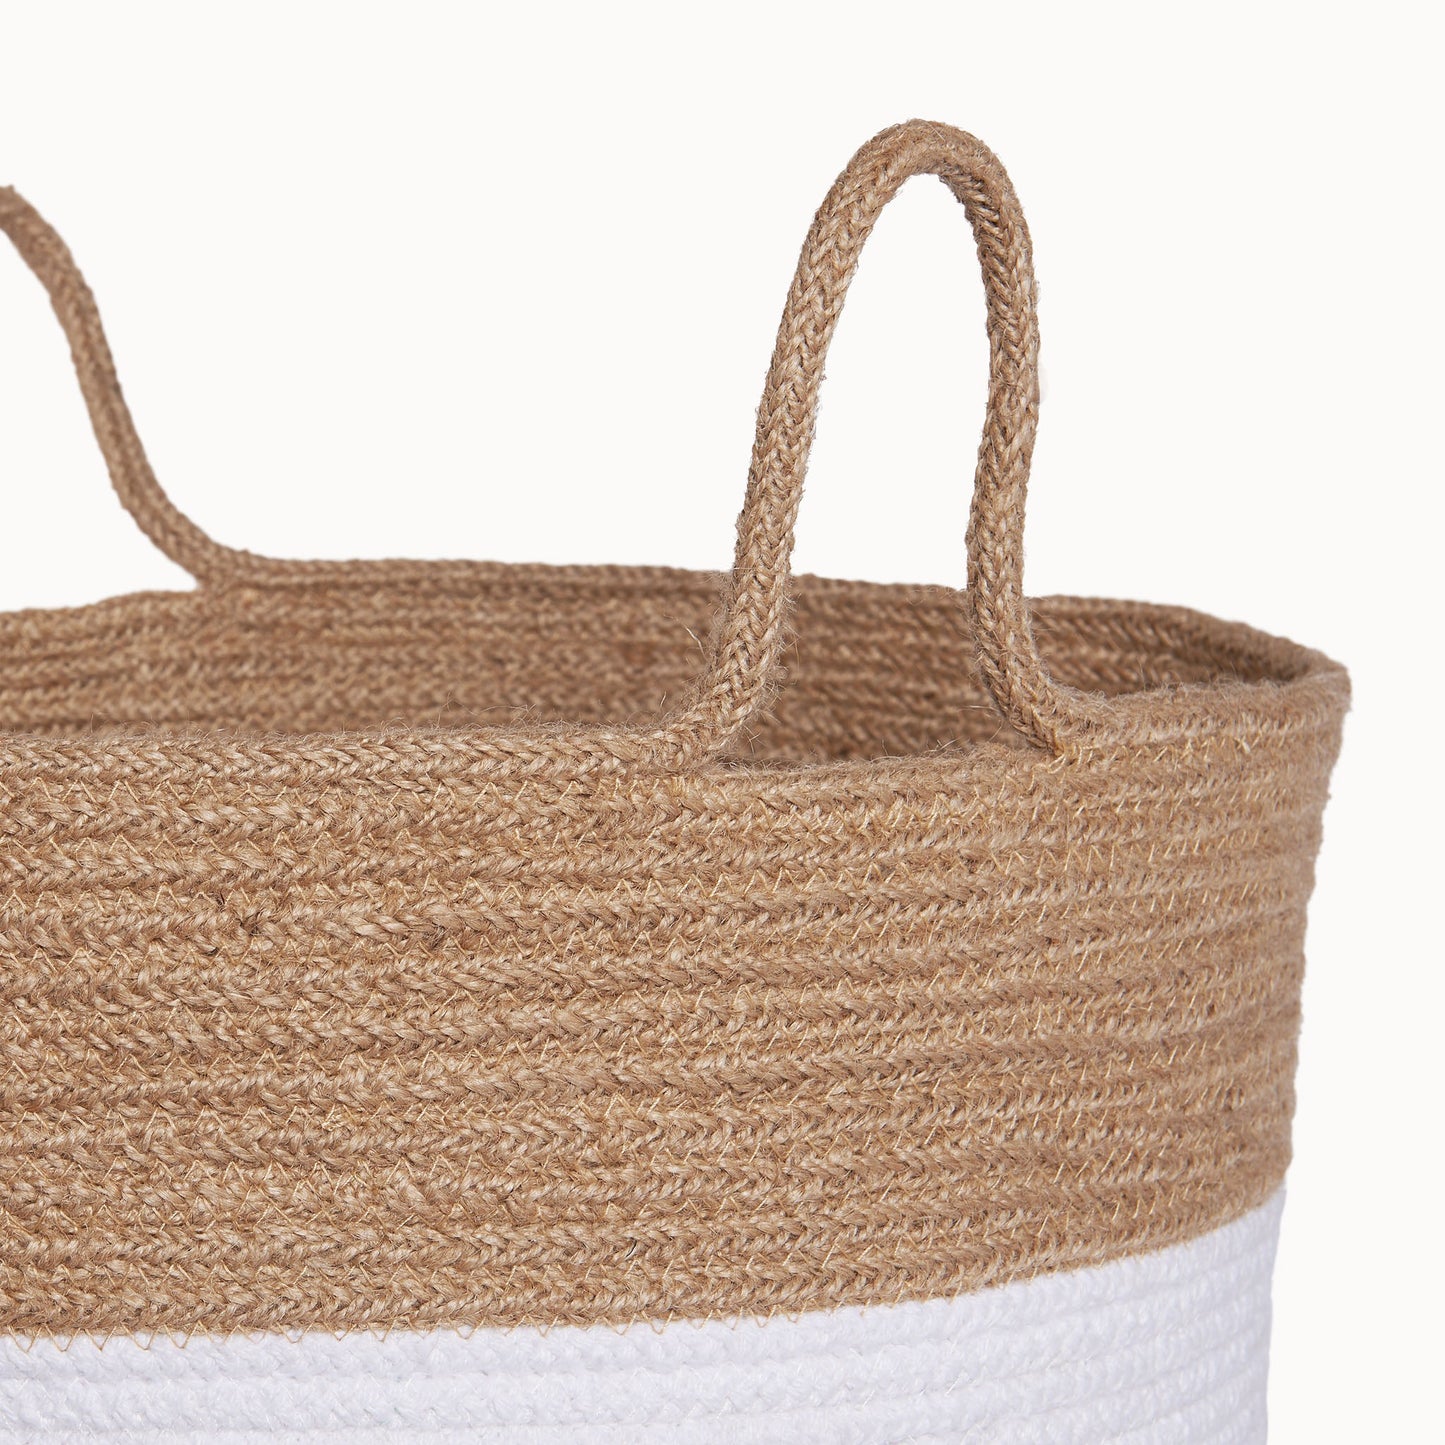 Cotton Jute Utility Basket - White and Natural